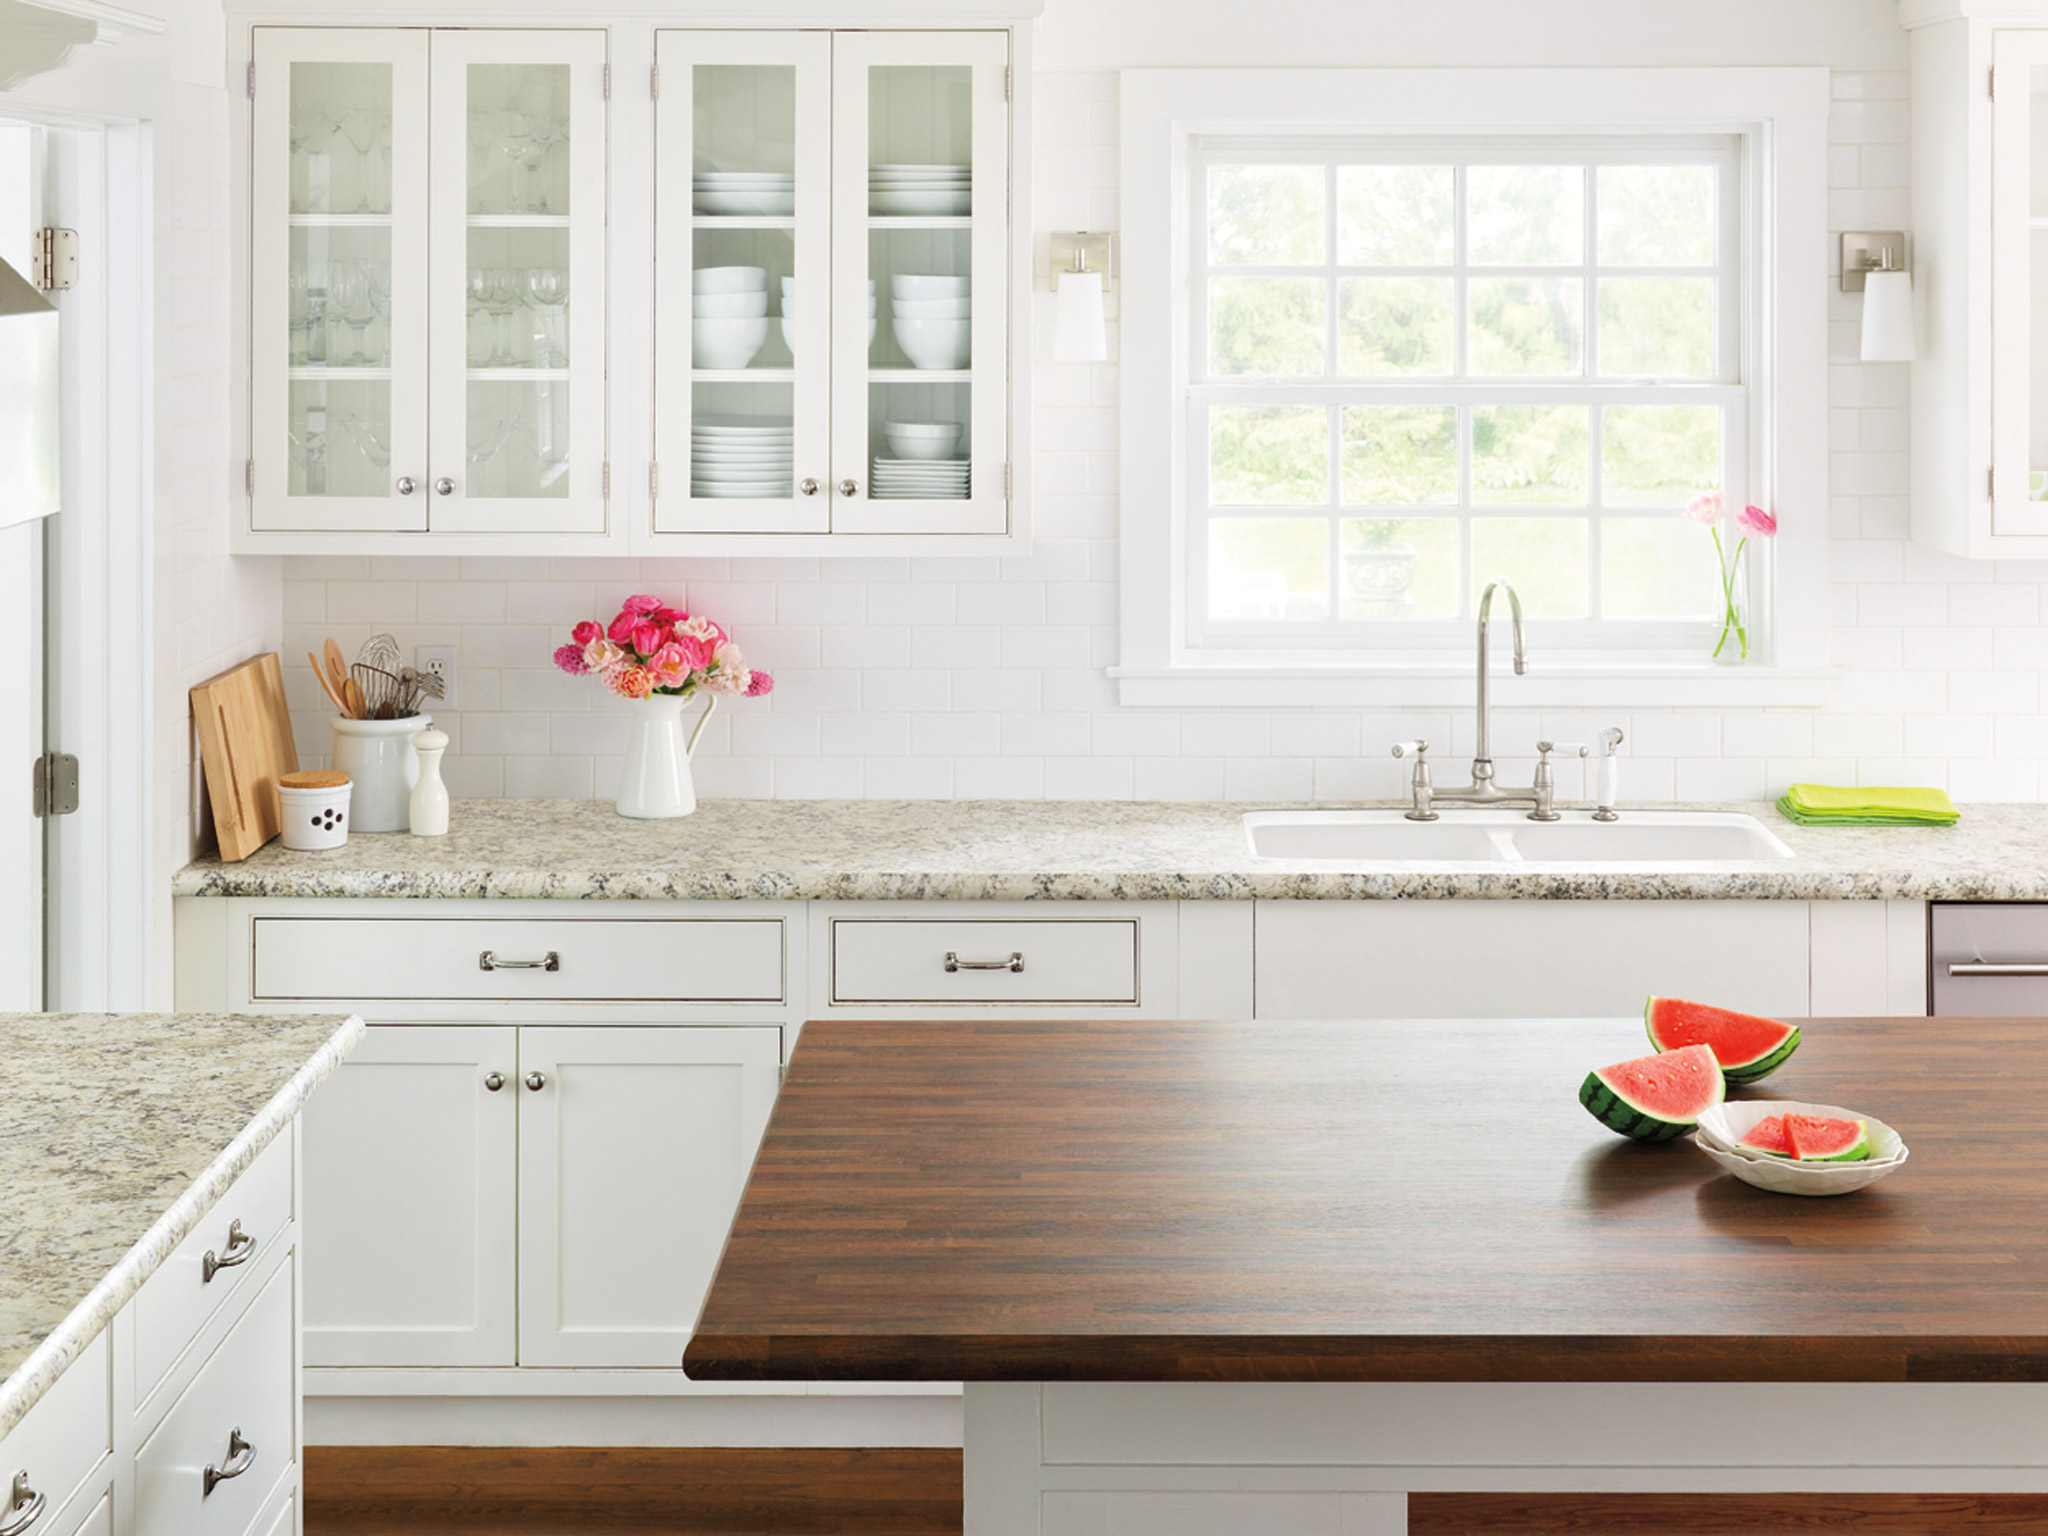 The Kitchen Remodel Countertop Advice You Should Never Take